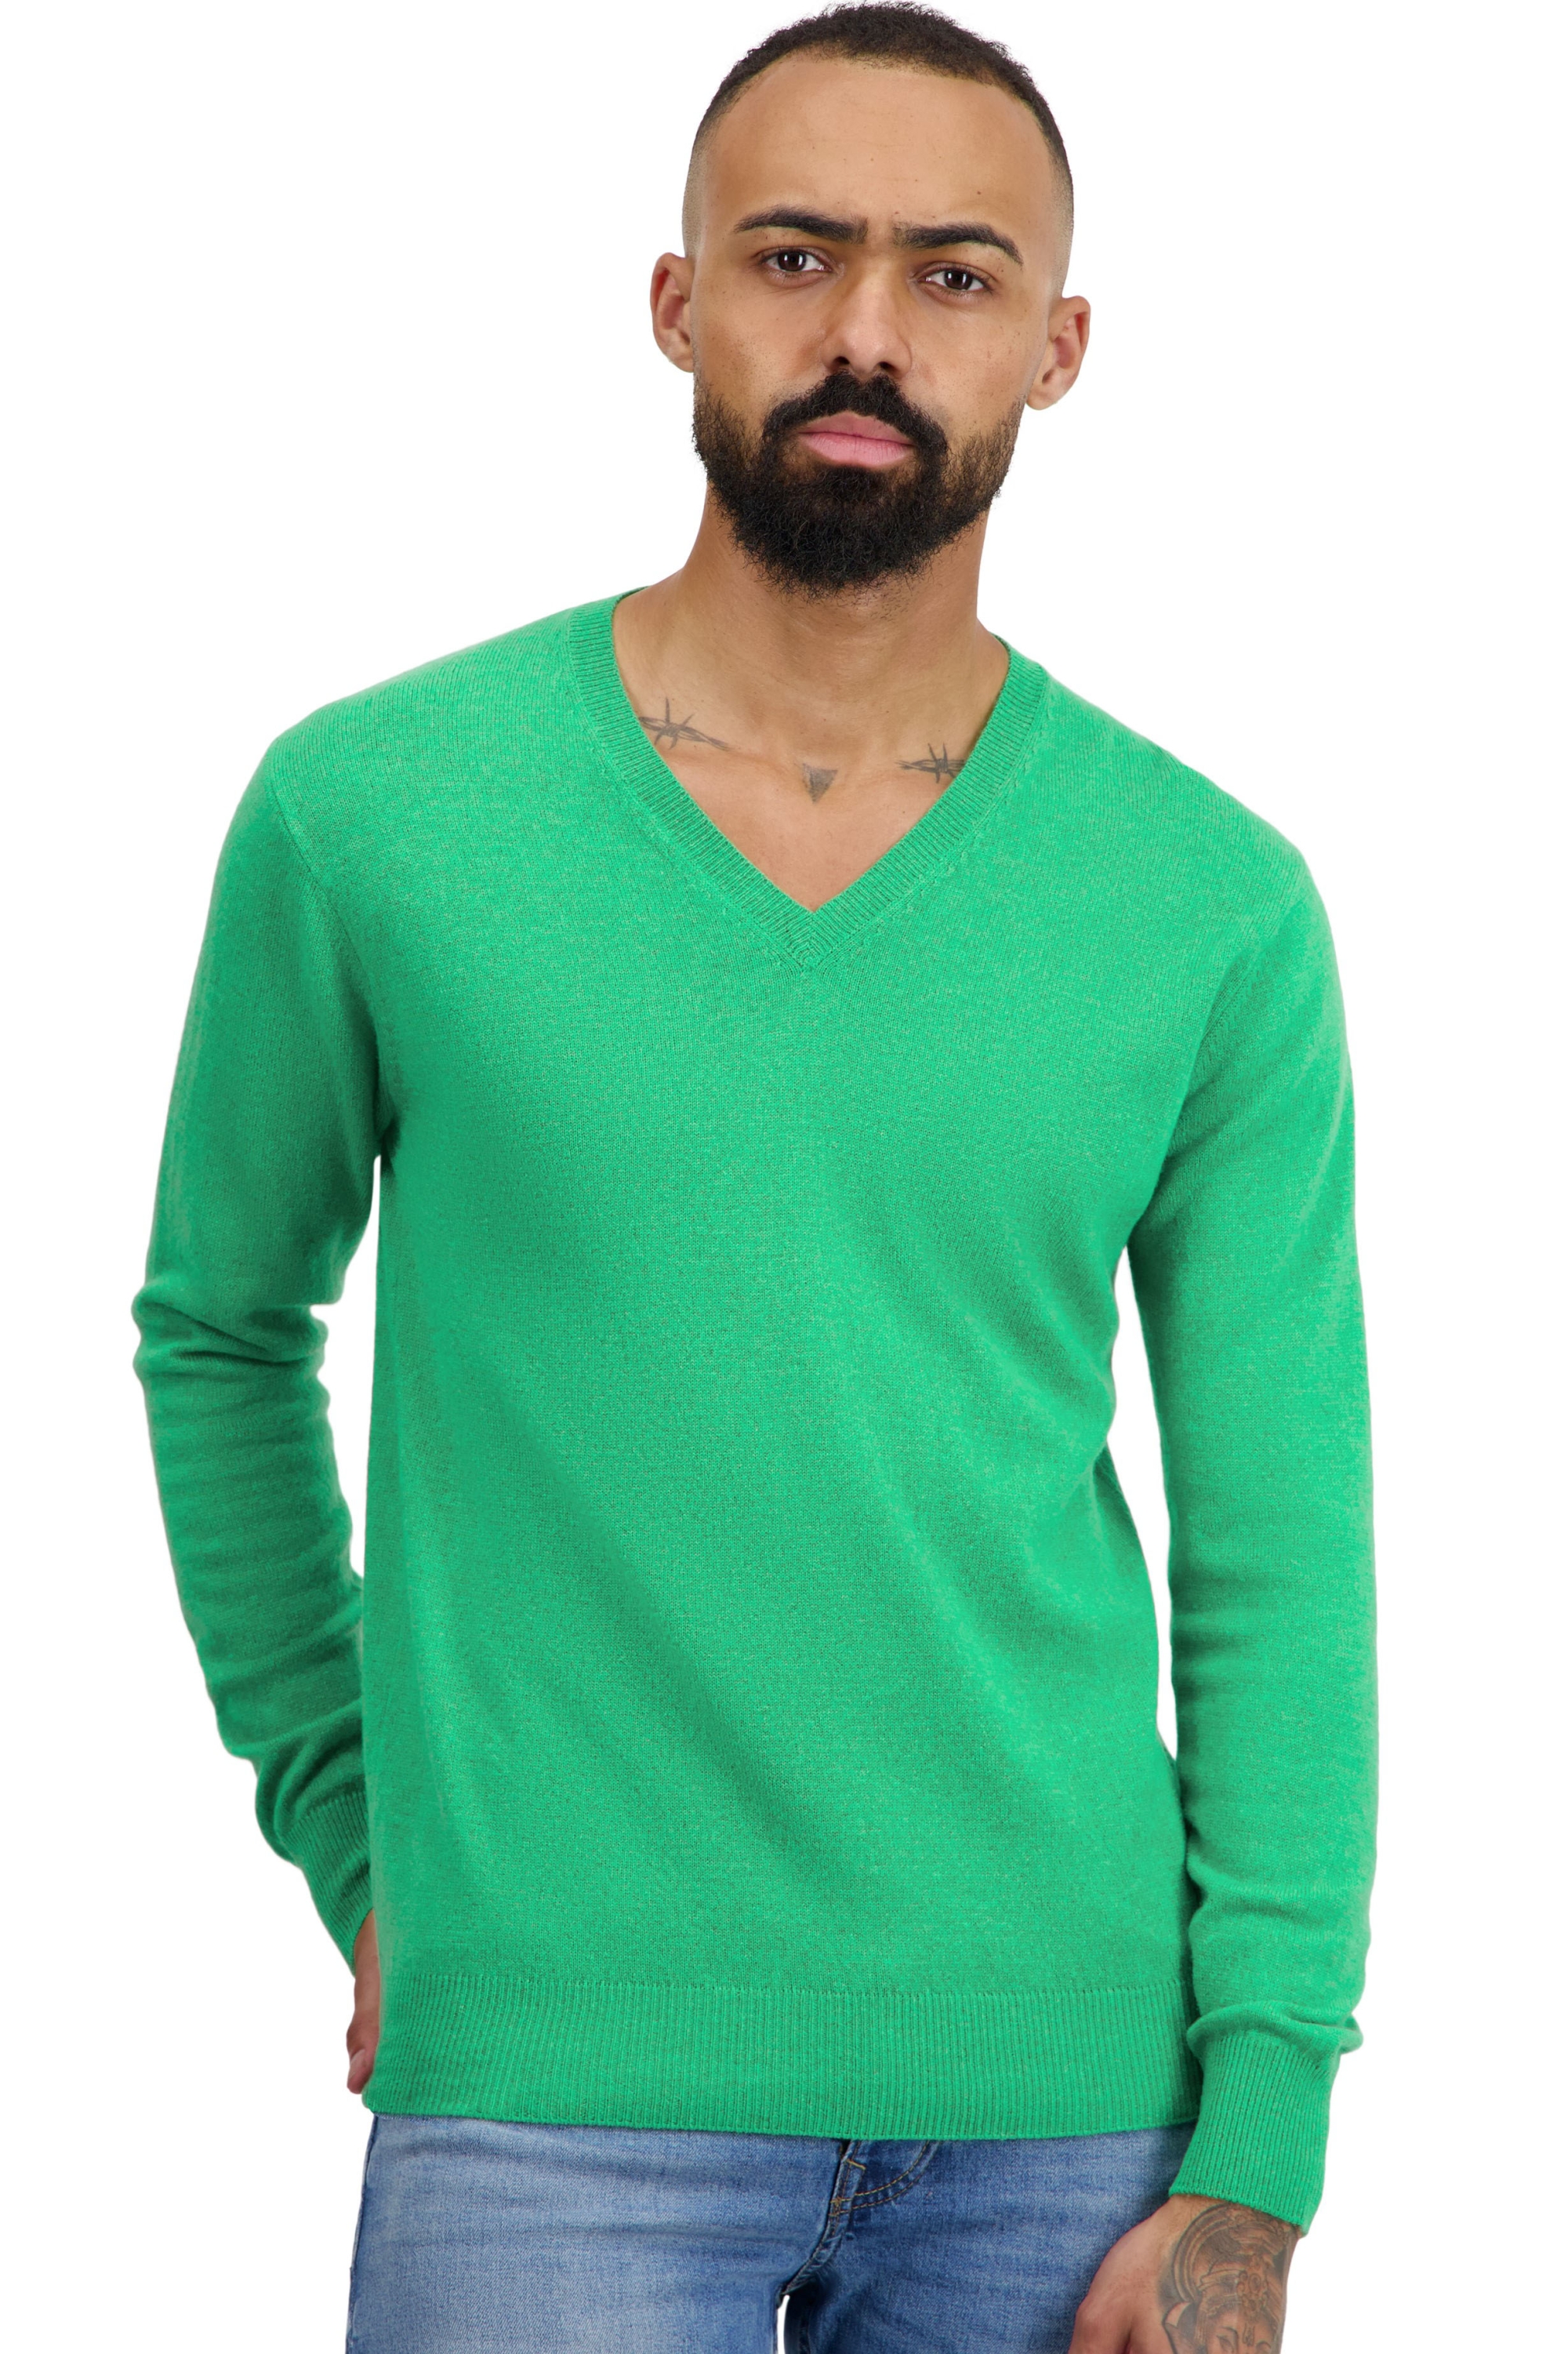 Cashmere men basic sweaters at low prices tor first midori m